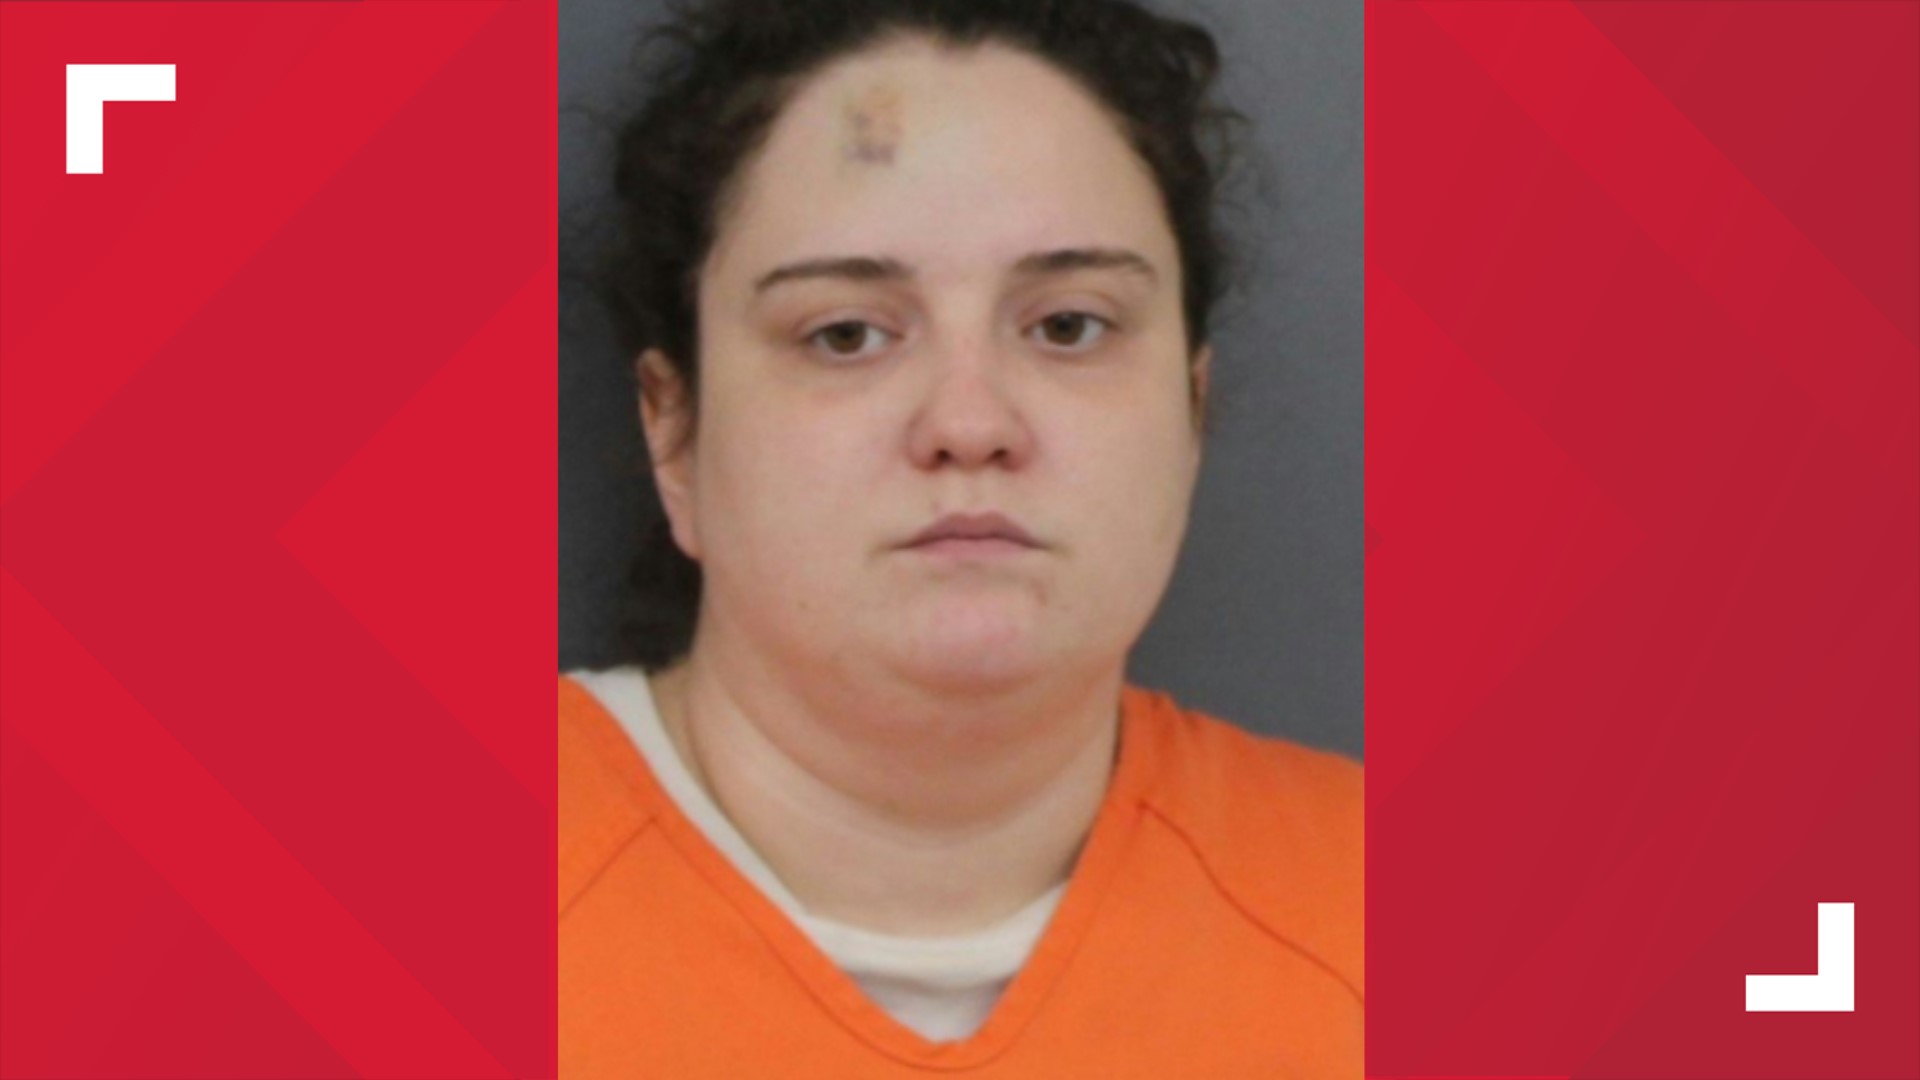 31-year-old Sophia Powell turned herself into the Rock Island County Jail on June 29. She has been arrested and booked on two charges.